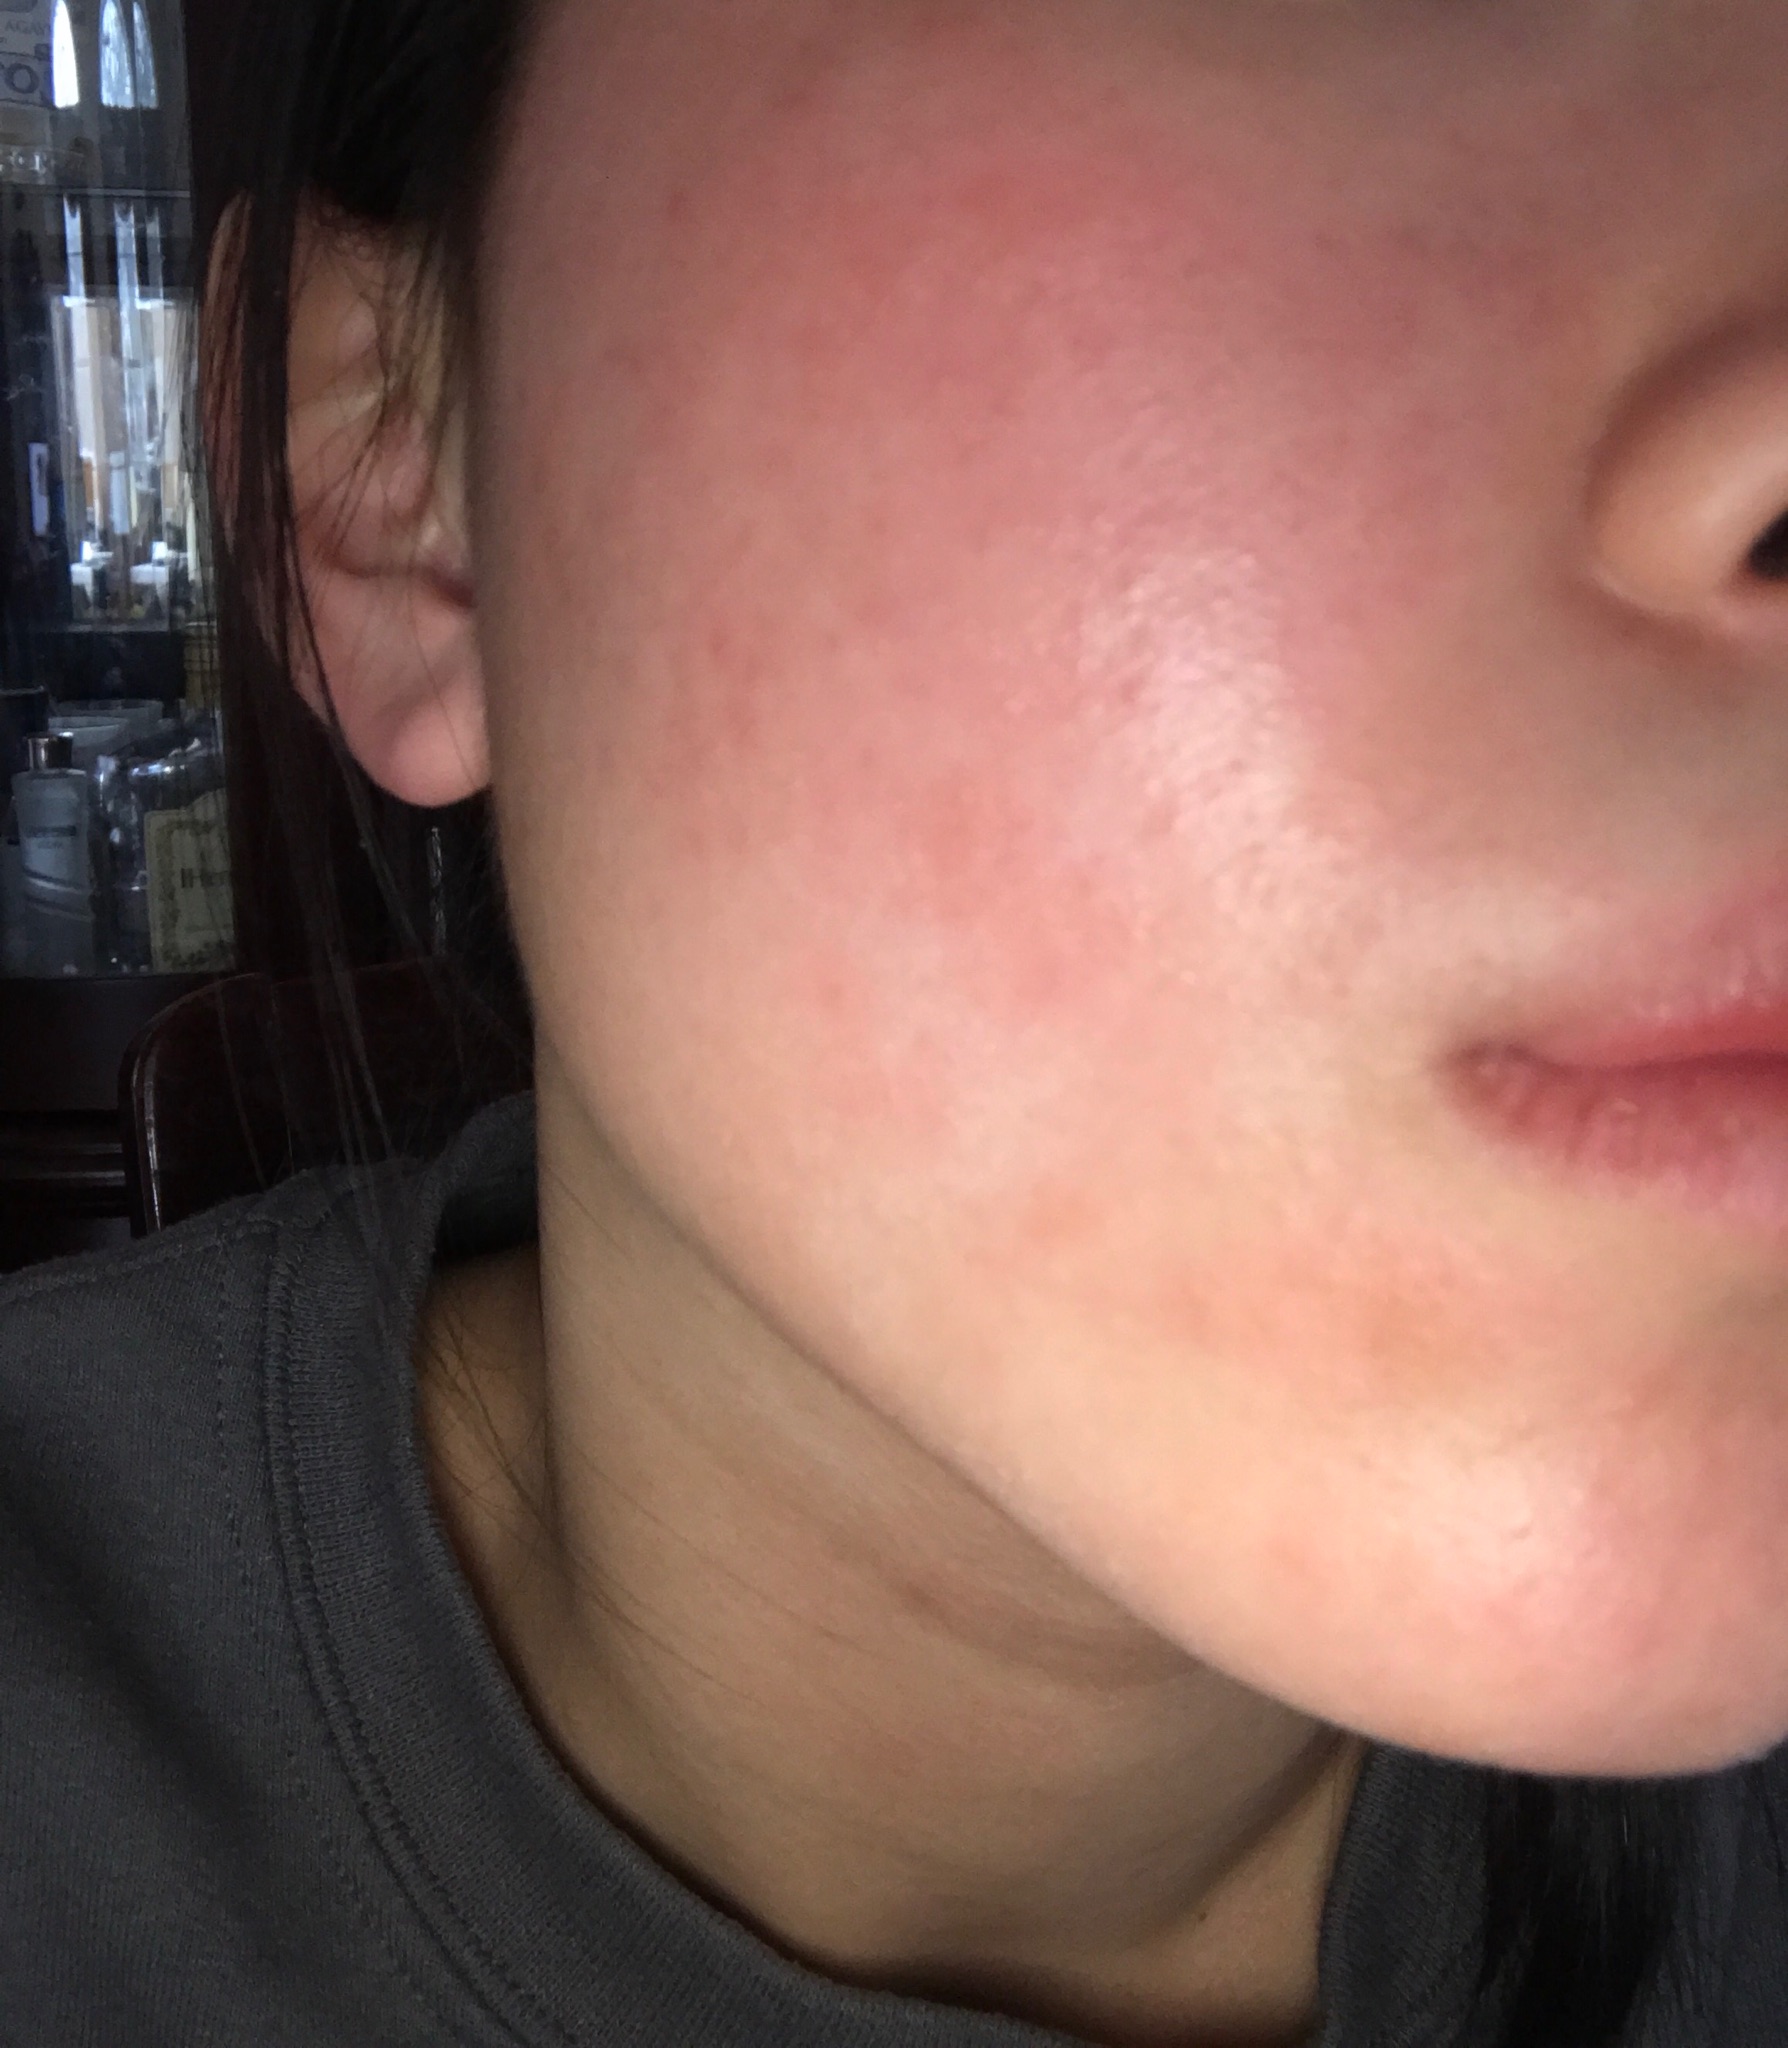 Small bumps rash-like itchy skin- Folliculitis? Staph infection? – General  acne discussion –  Forum